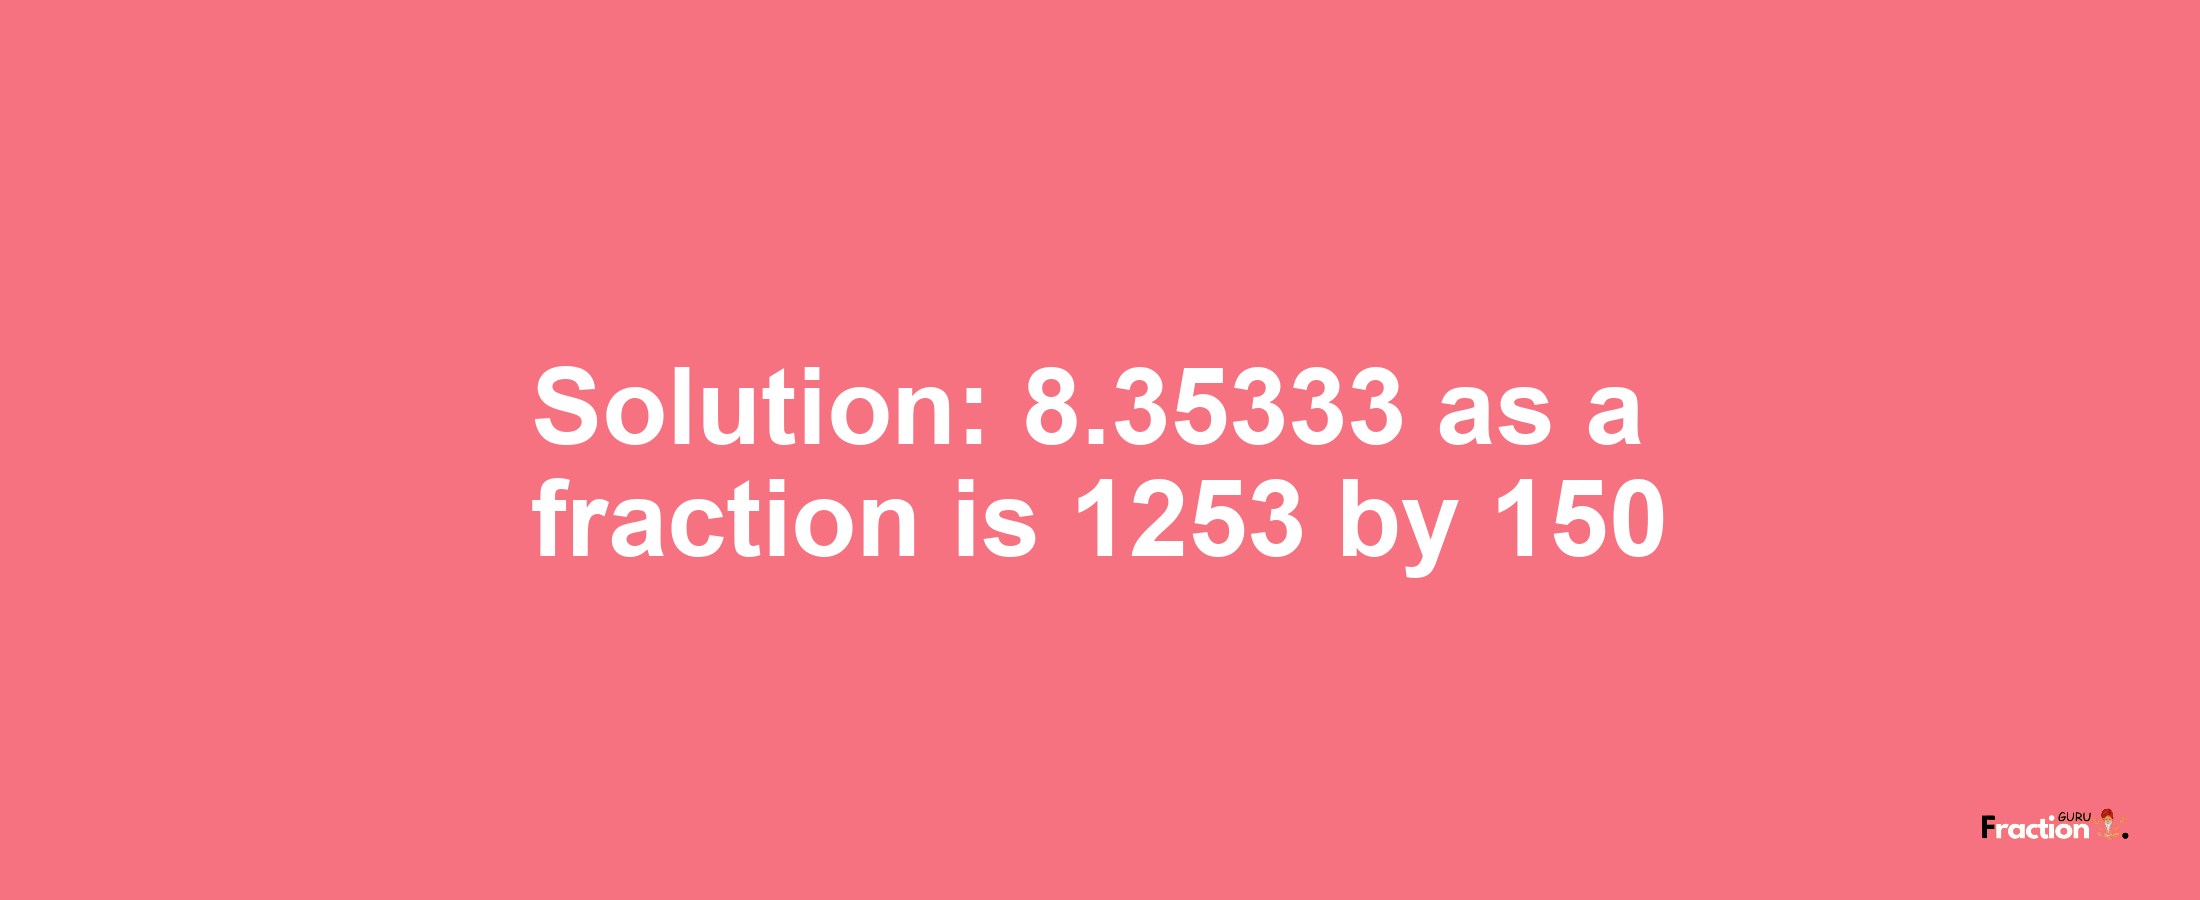 Solution:8.35333 as a fraction is 1253/150